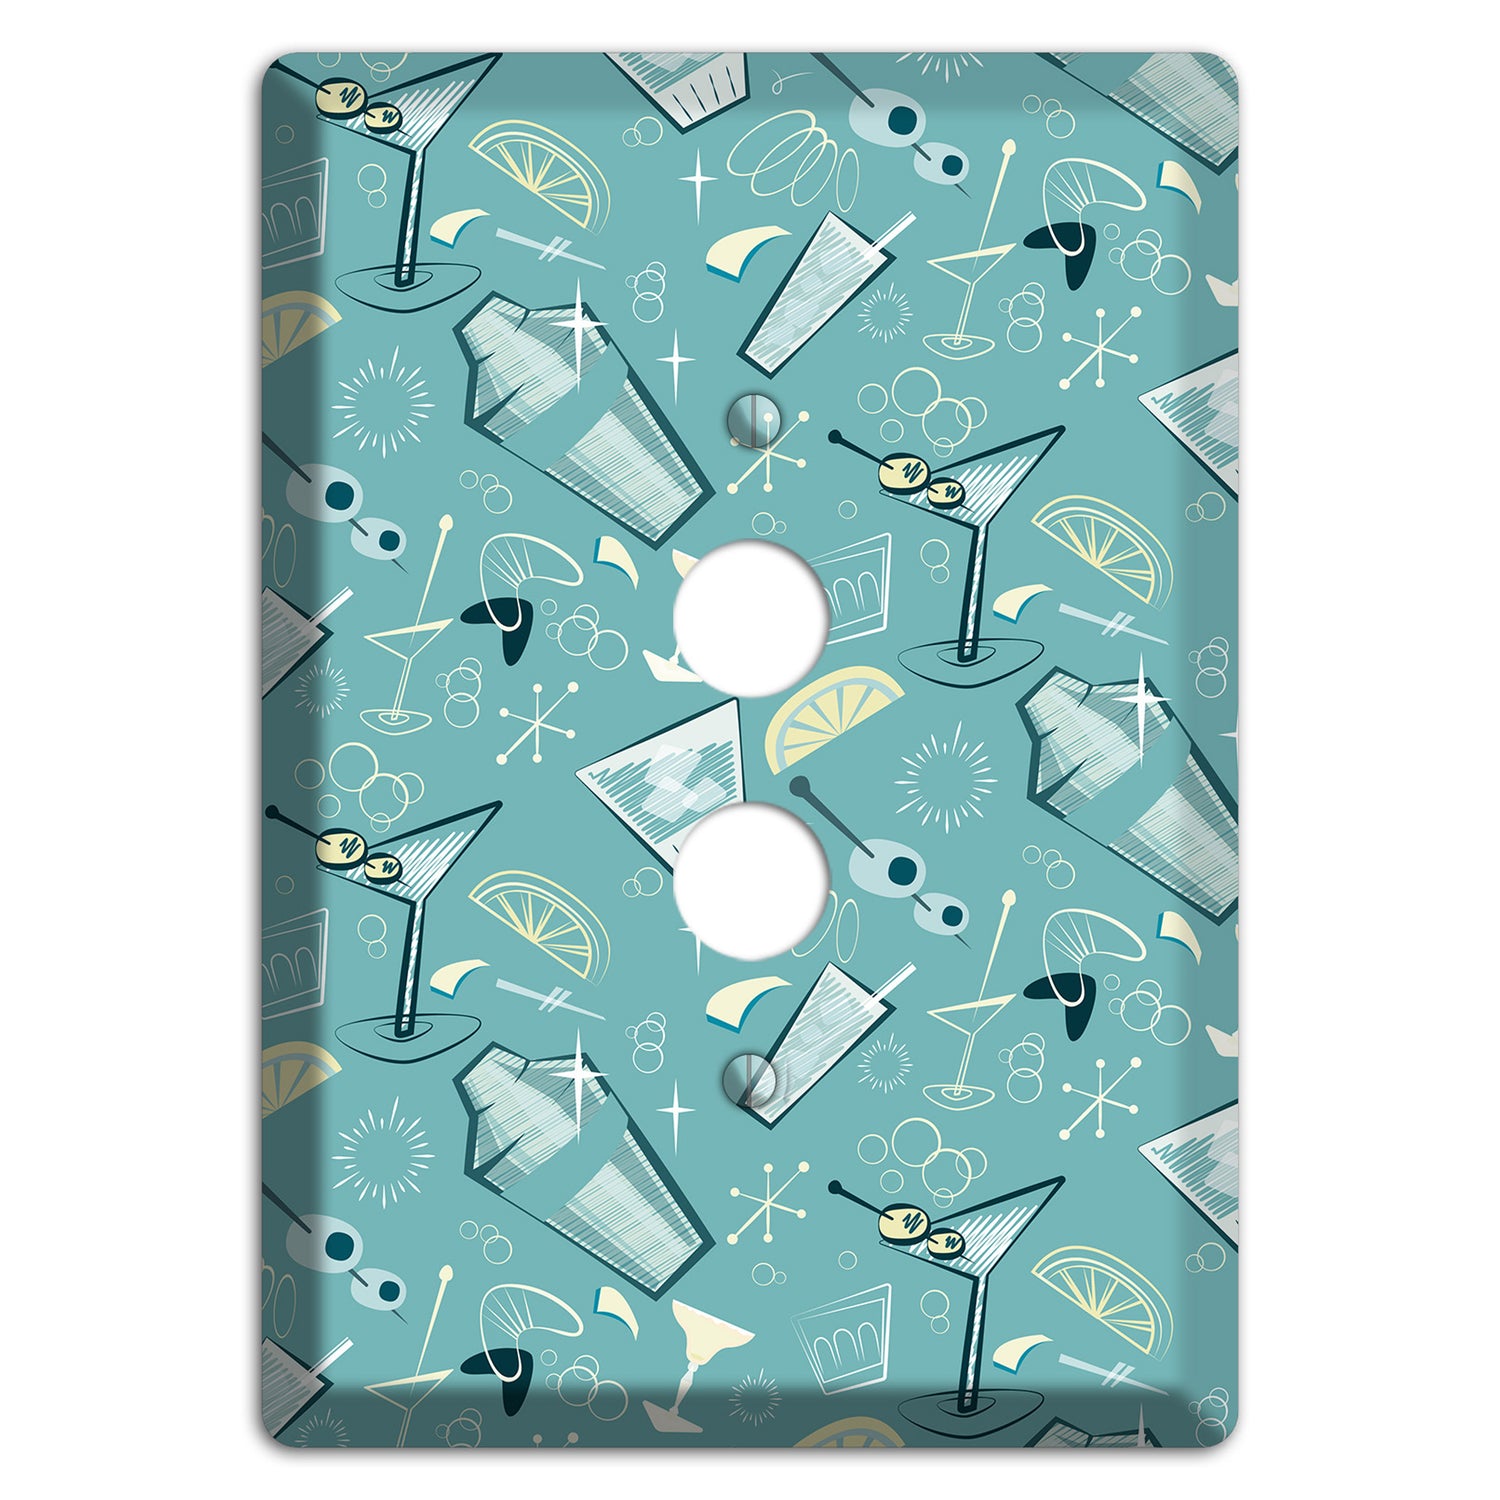 Retro Cocktails Teal 1 Pushbutton Wallplate